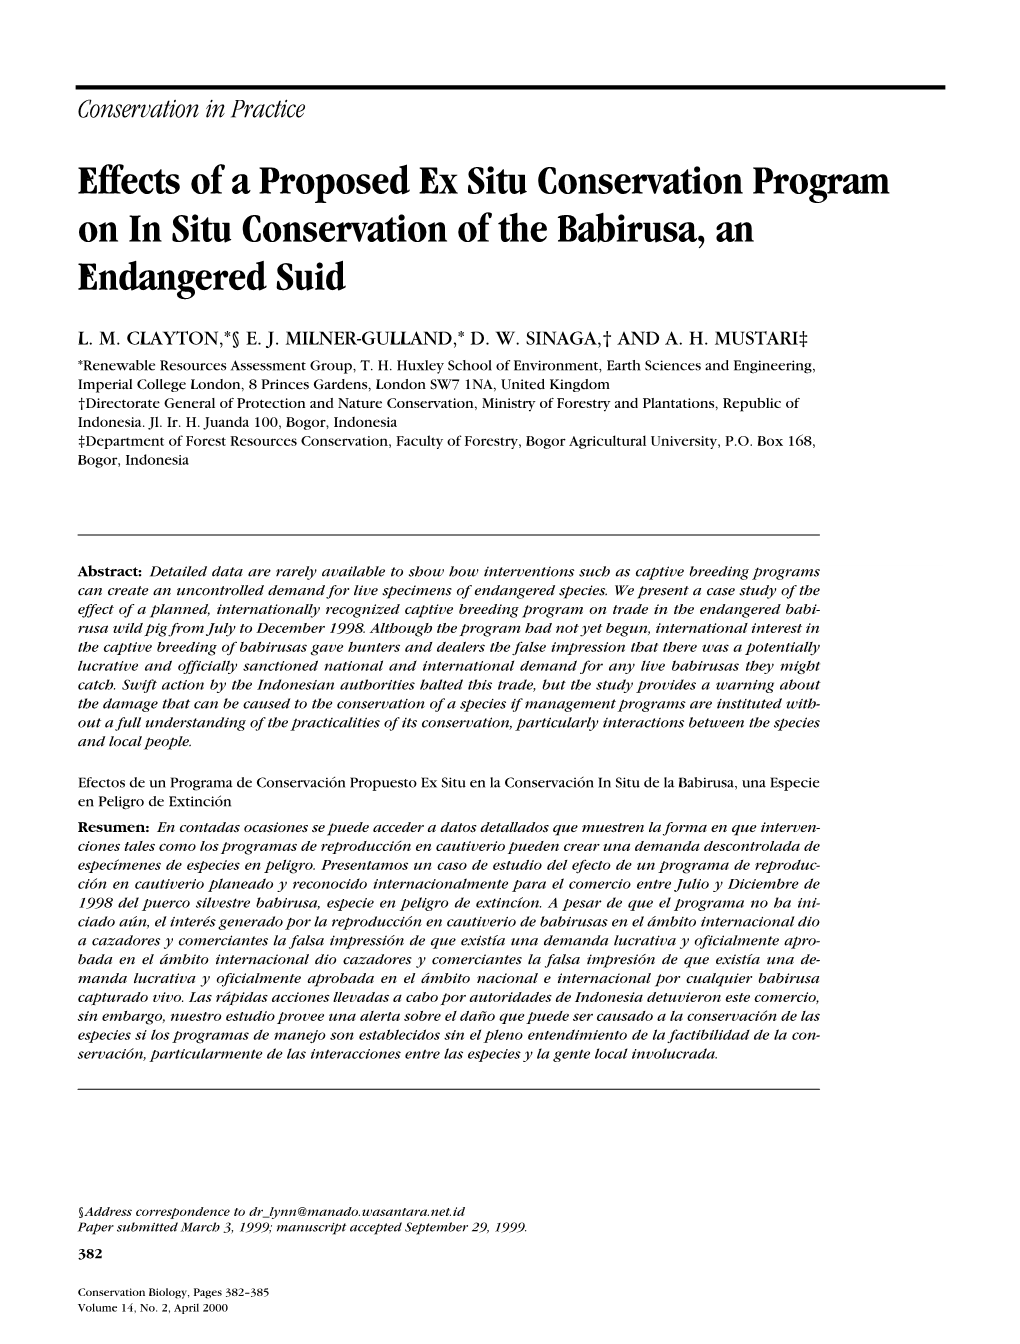 Effects of a Proposed Ex Situ Conservation Program on in Situ Conservation of the Babirusa, an Endangered Suid